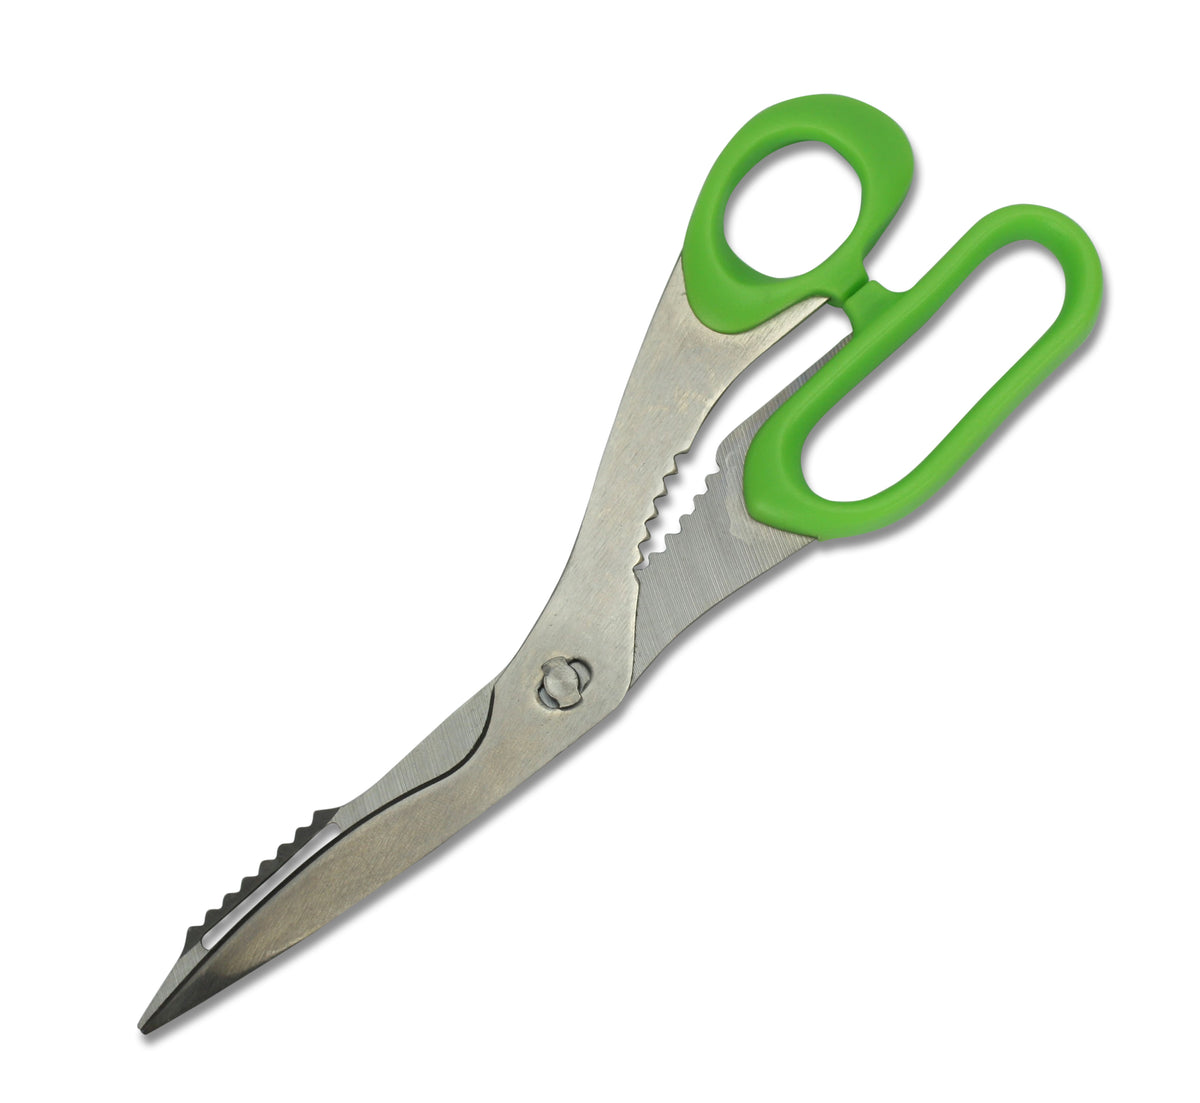 Crab Scissors, 20cm Stainless Steel, Detachable Blades for Cleaning